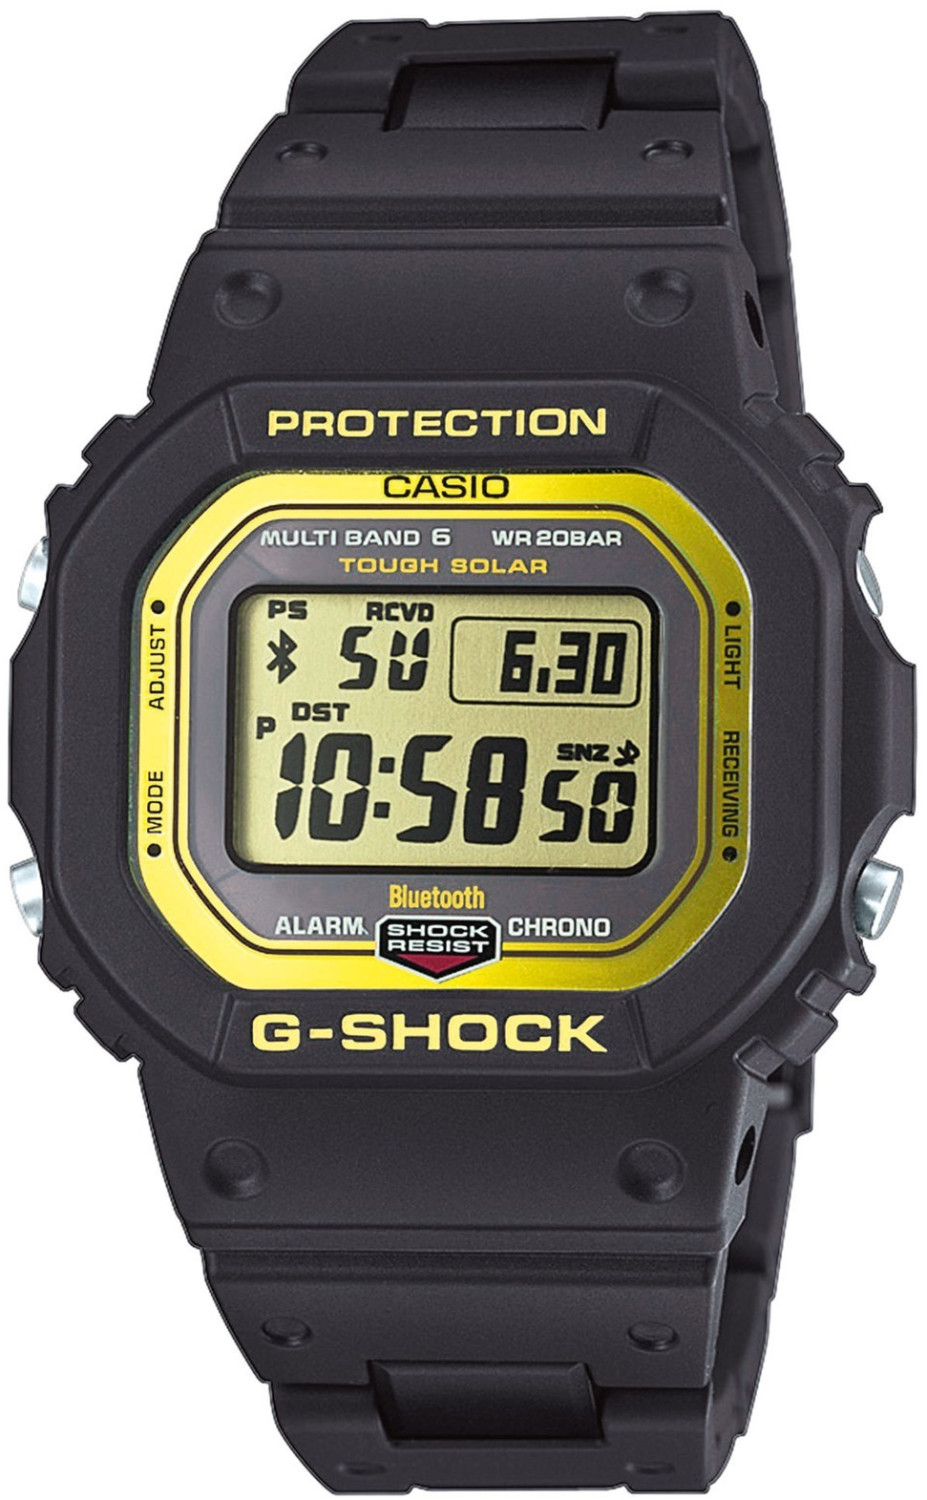 Buy Casio G-Shock GW-B5600BC-1ER from £208.20 (Today) – Best Deals on